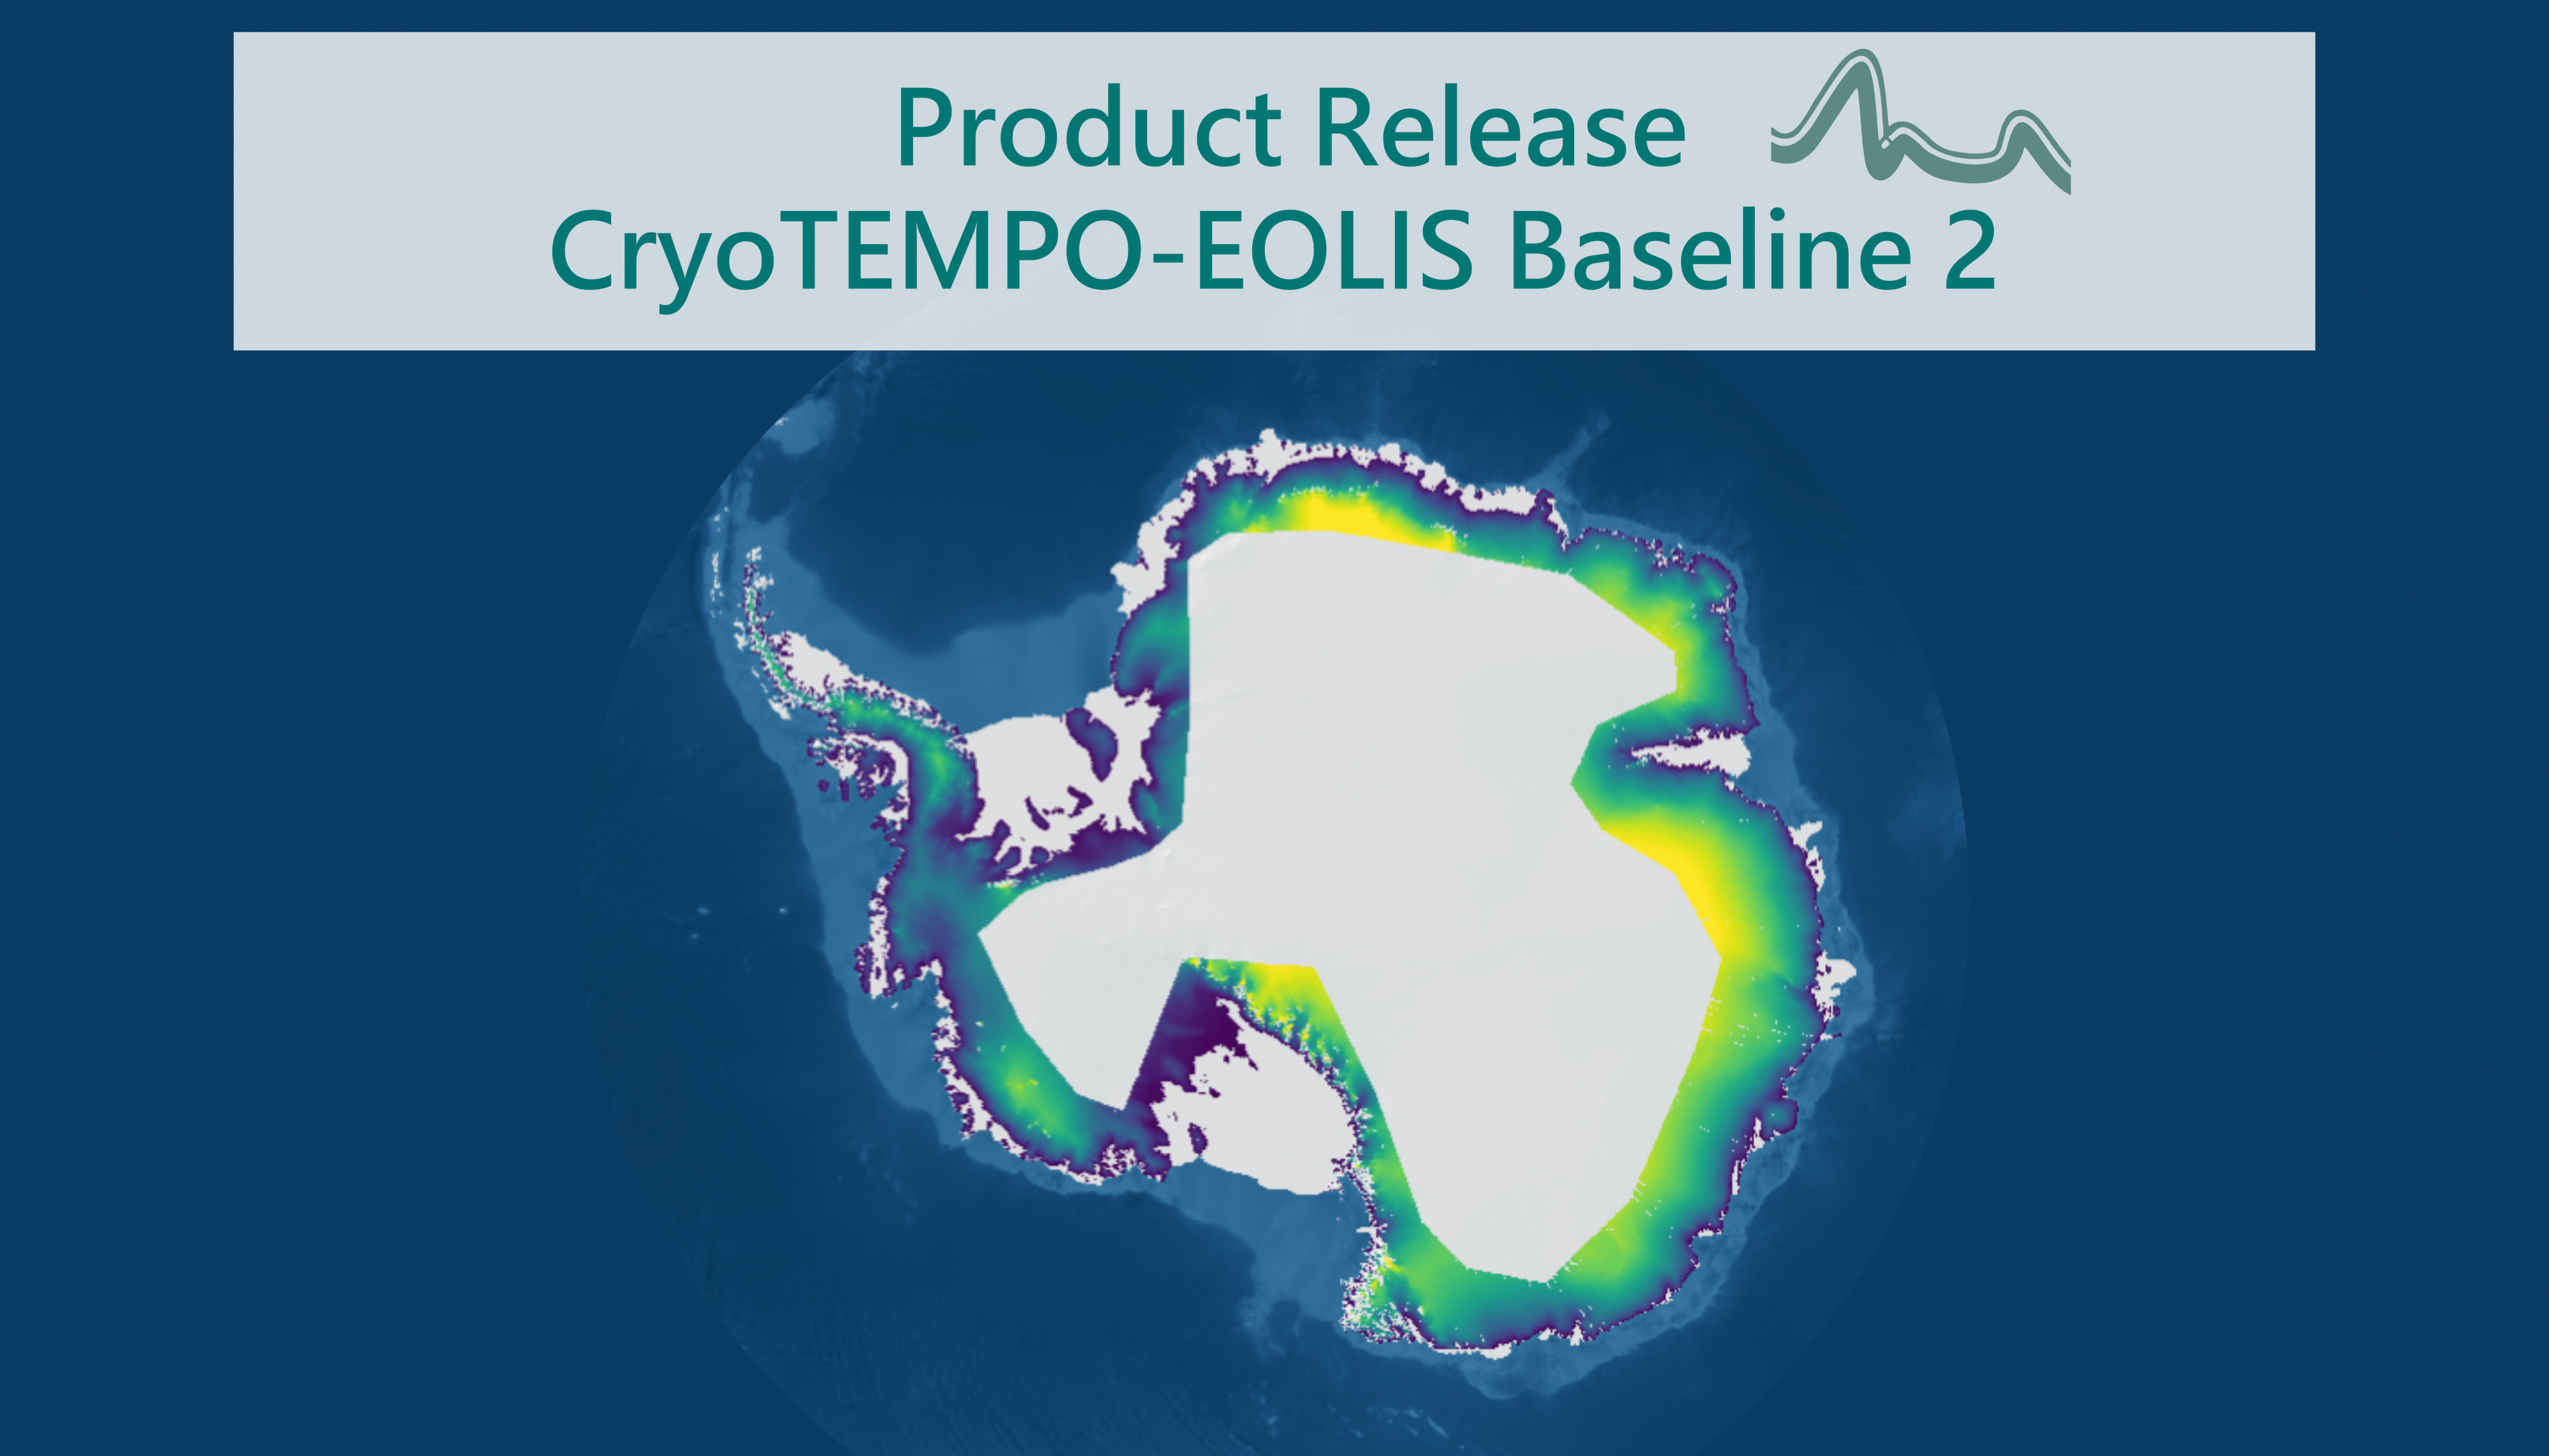 You are currently viewing Product Release Baseline 2: Improved Coverage and Data Quality in Baseline 2 of the CryoTEMPO-EOLIS Products